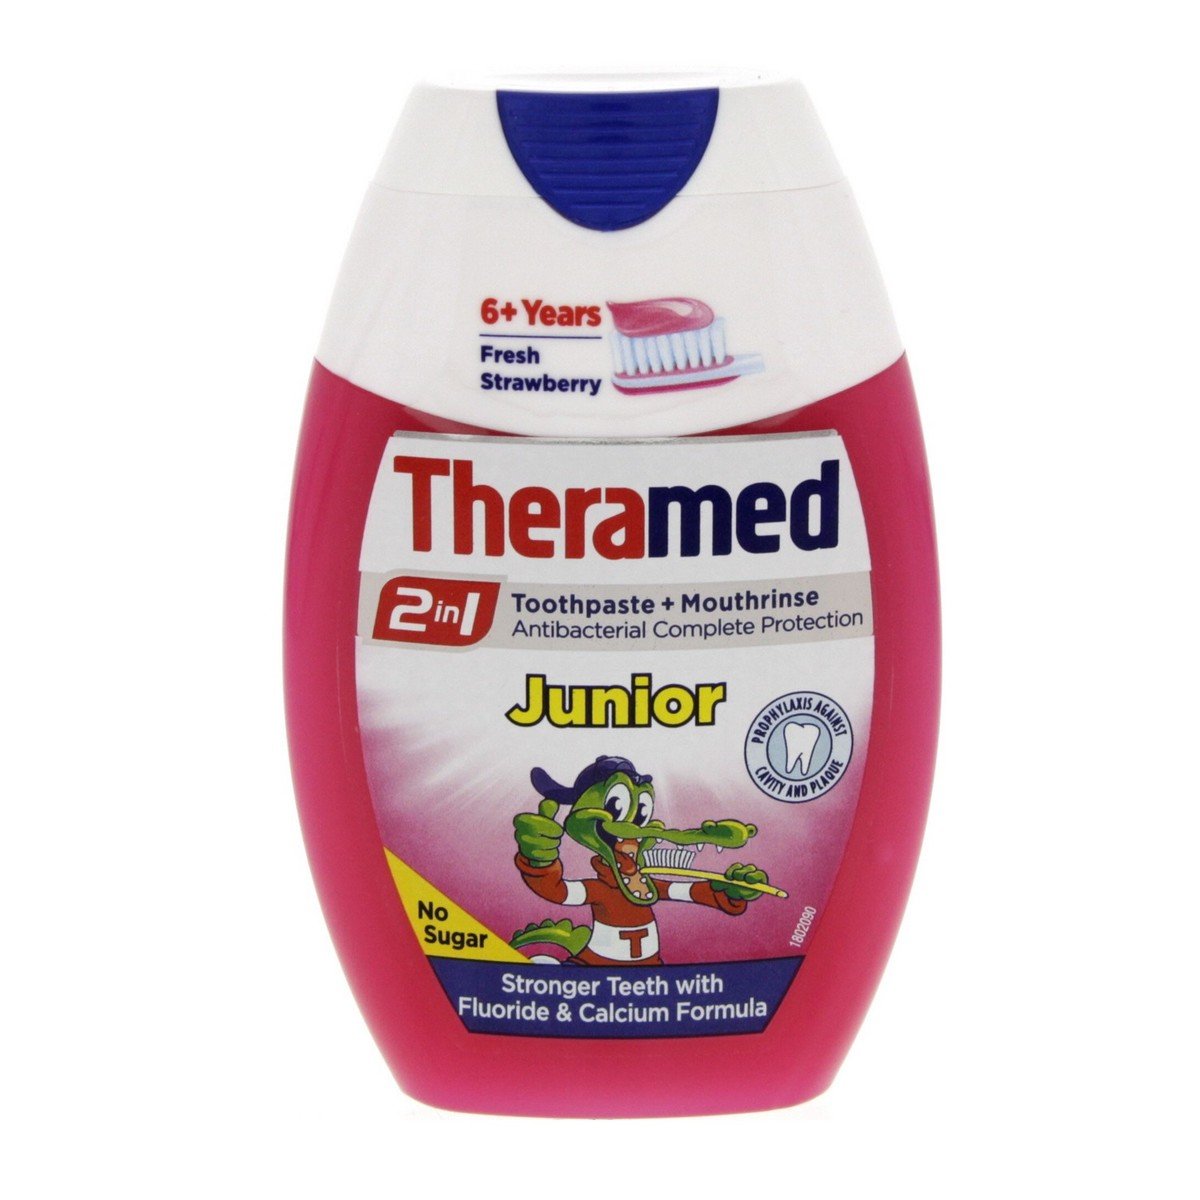 Theramed Junior 2 in 1 Toothpaste + Mouthrinse 75 ml